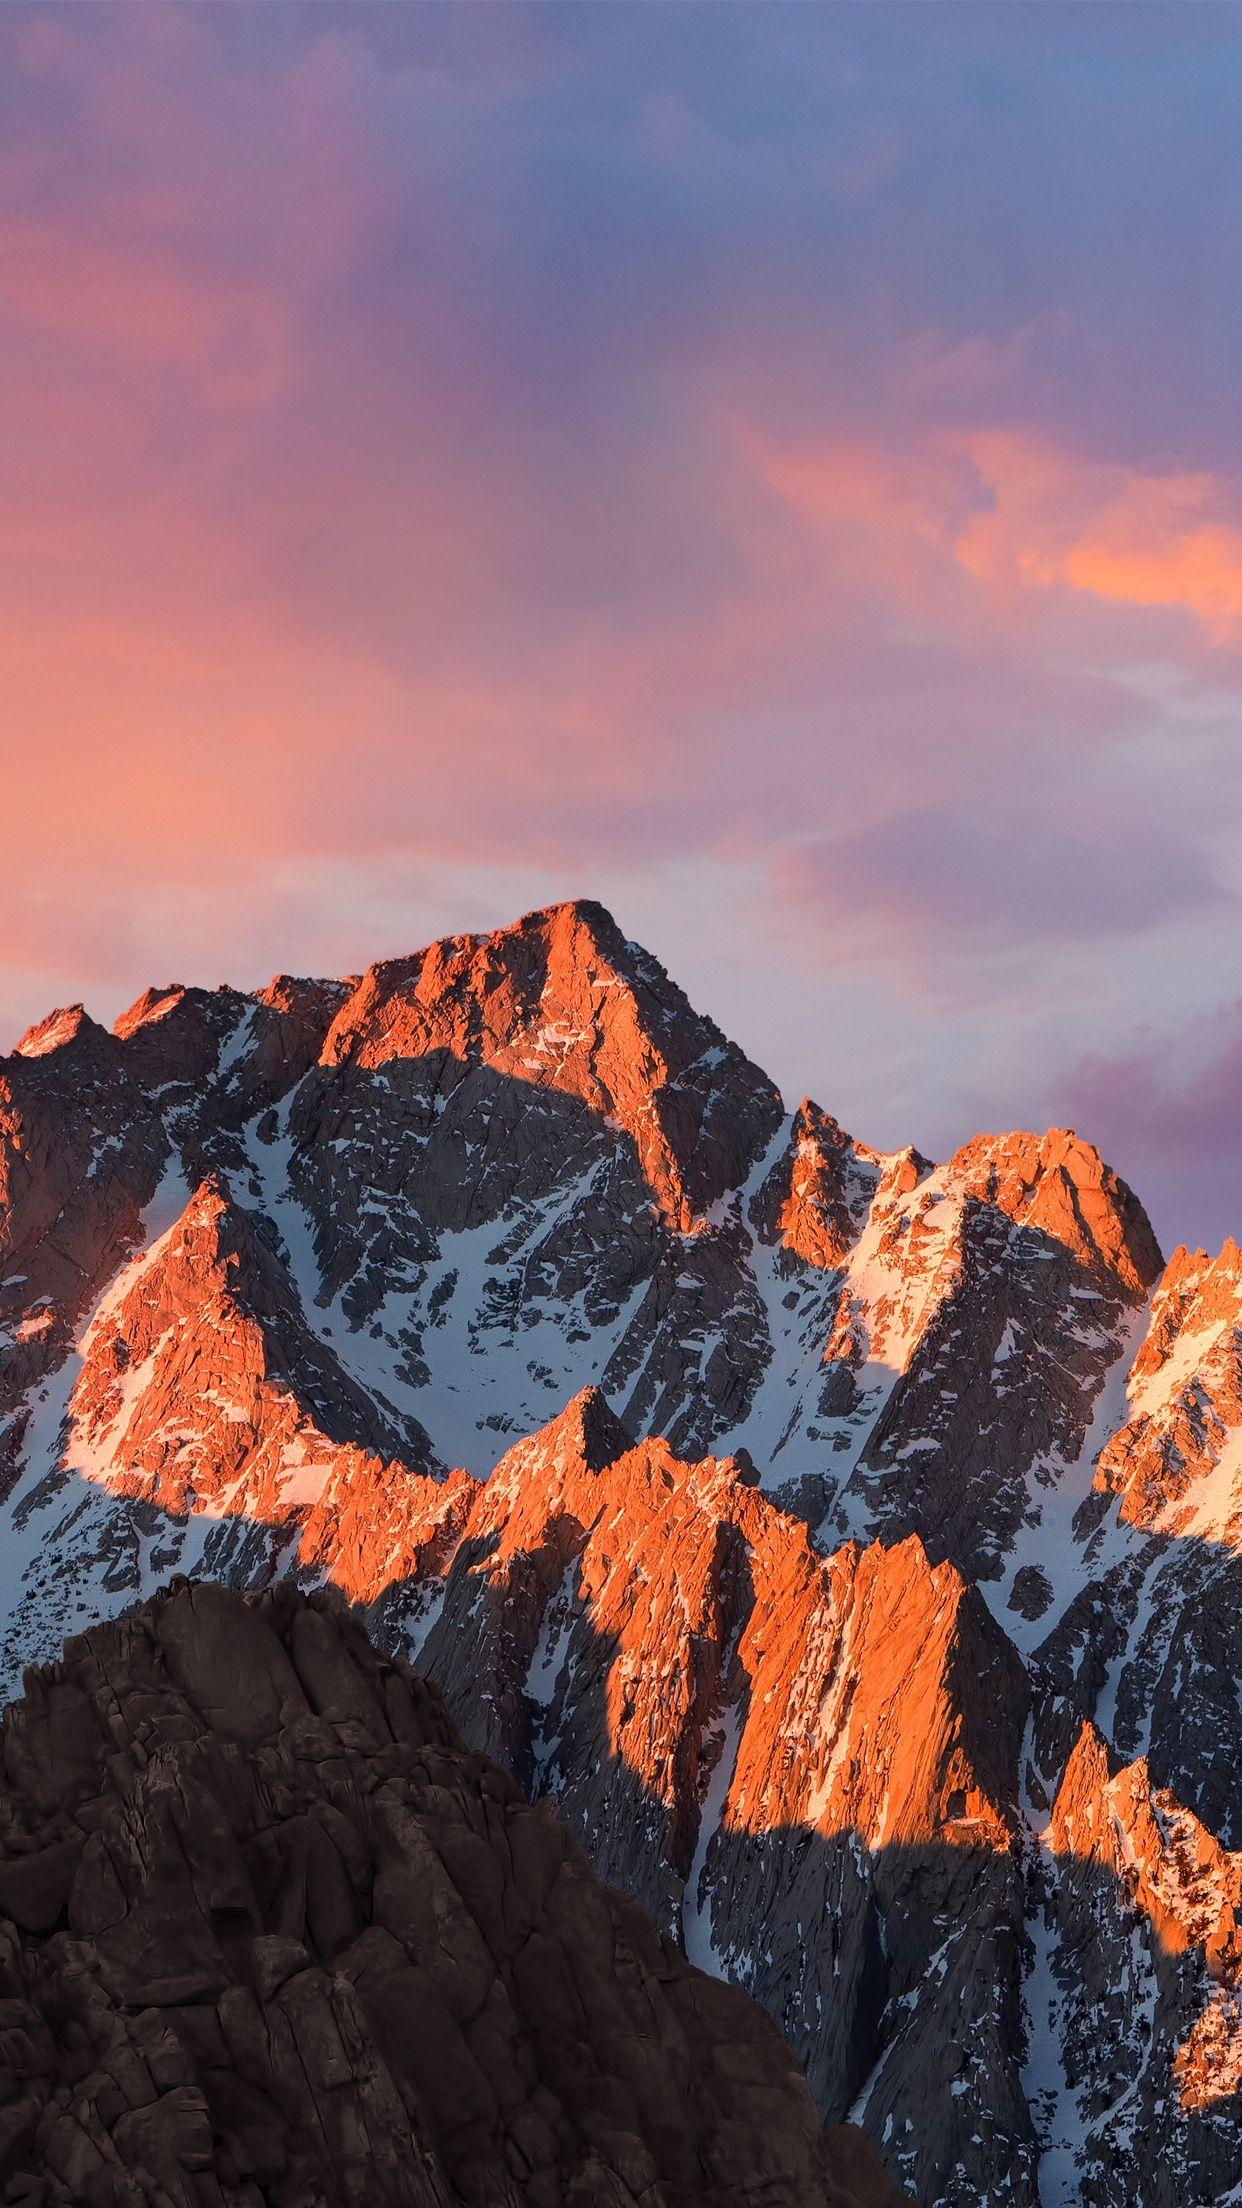 Download Official iOS 10 and macOS Sierra Wallpaper Here